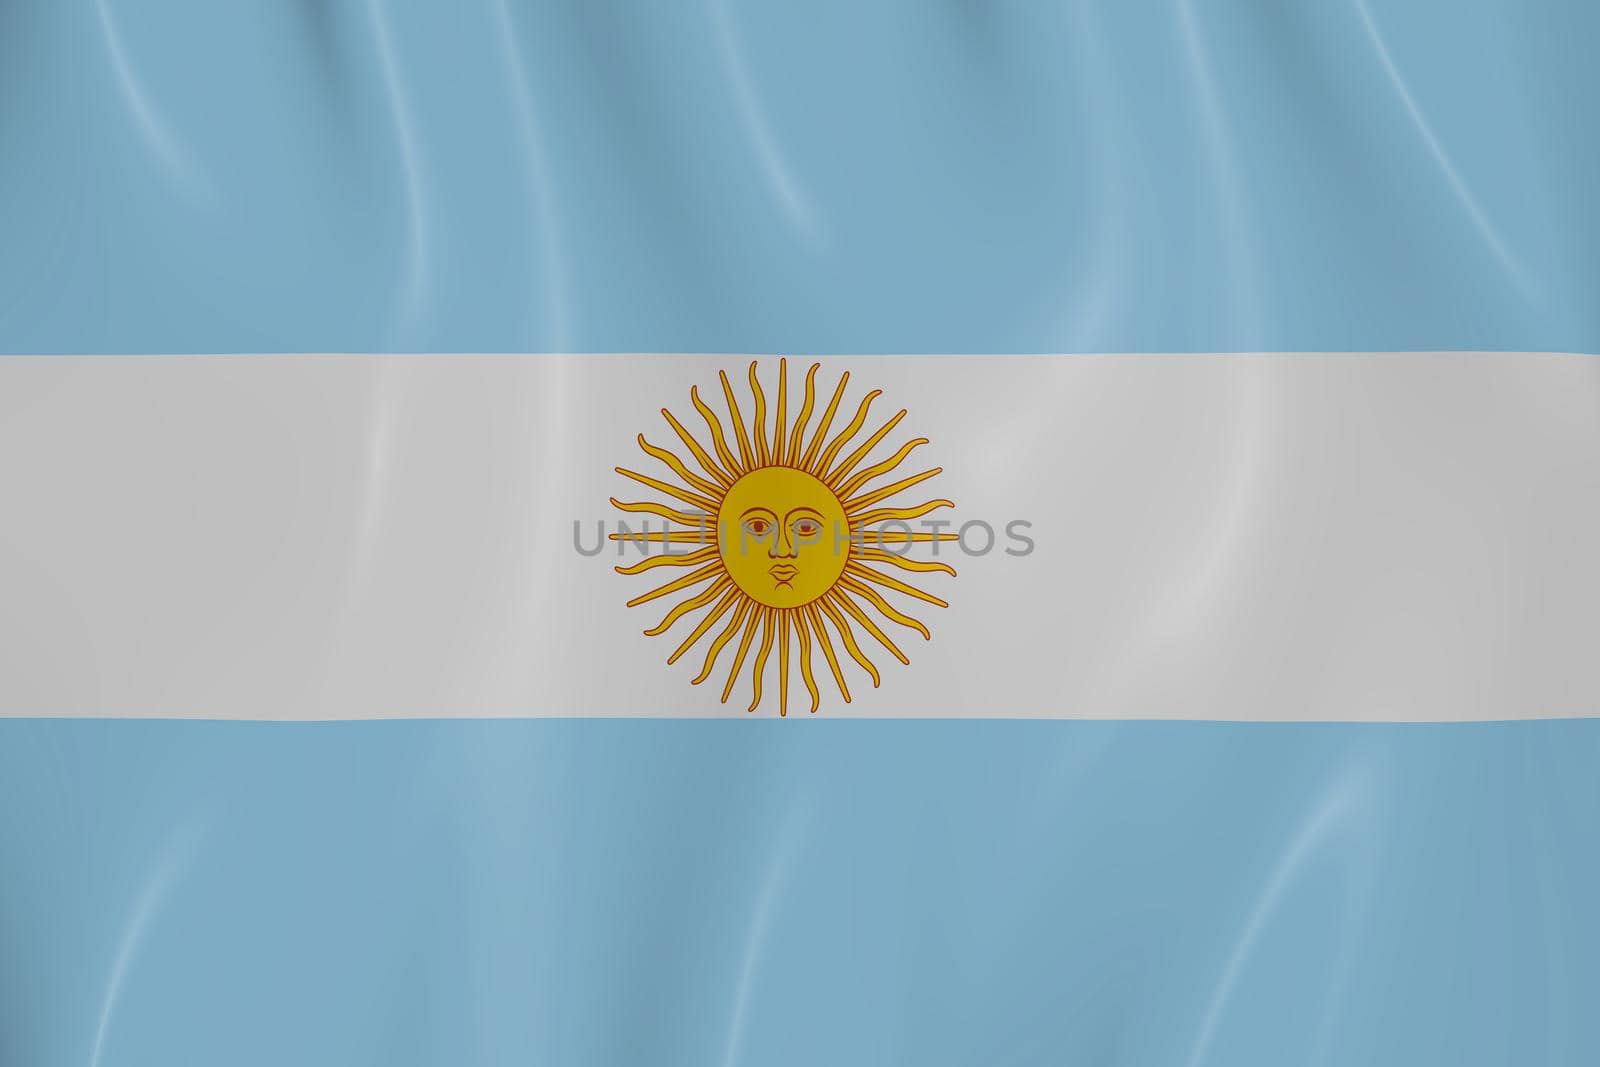 Argentine state flag tossed in the wind